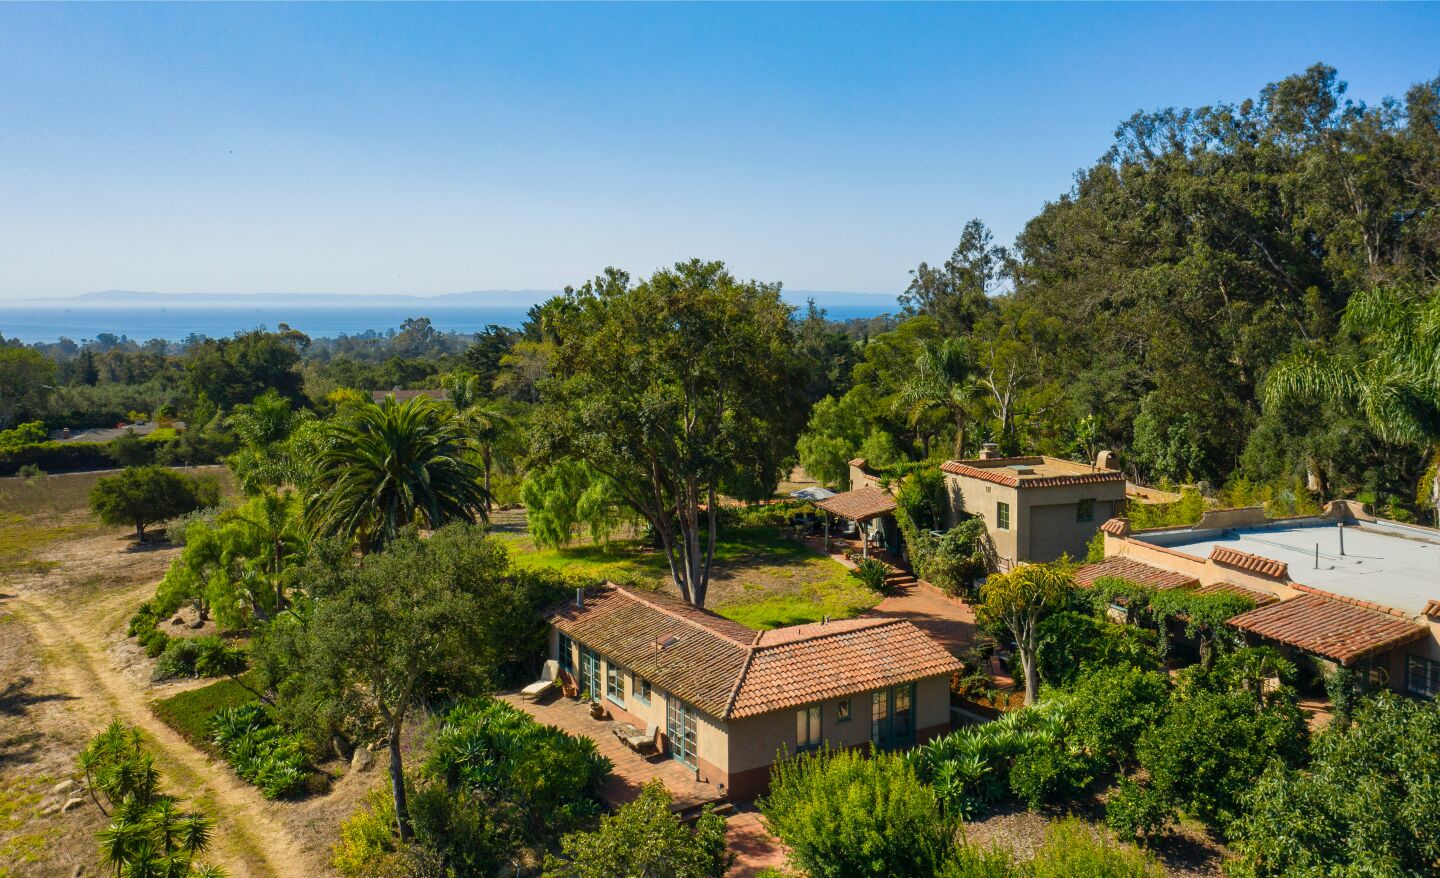 Spanning 13 acres in the Santa Ynez Mountains, the compound holds three structures, a swimming pool and tennis court.